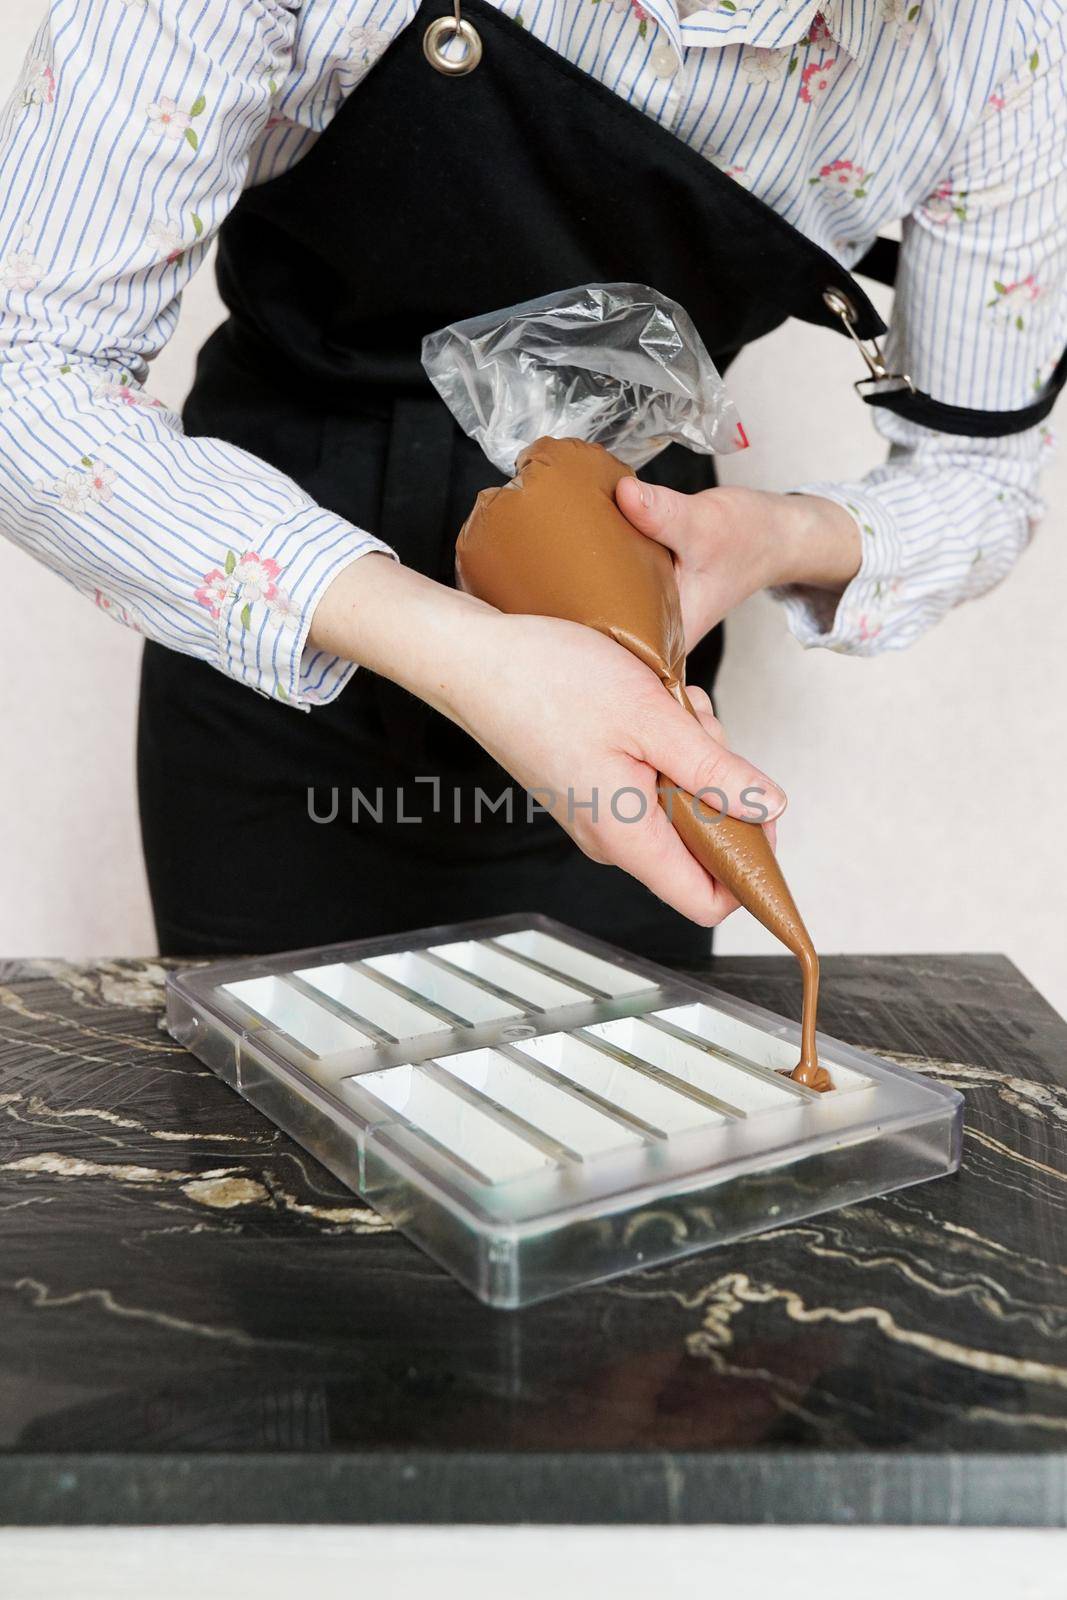 Chocolatier pours chocolate into molds. Chef using pastry bag filling chocolate by natali_brill